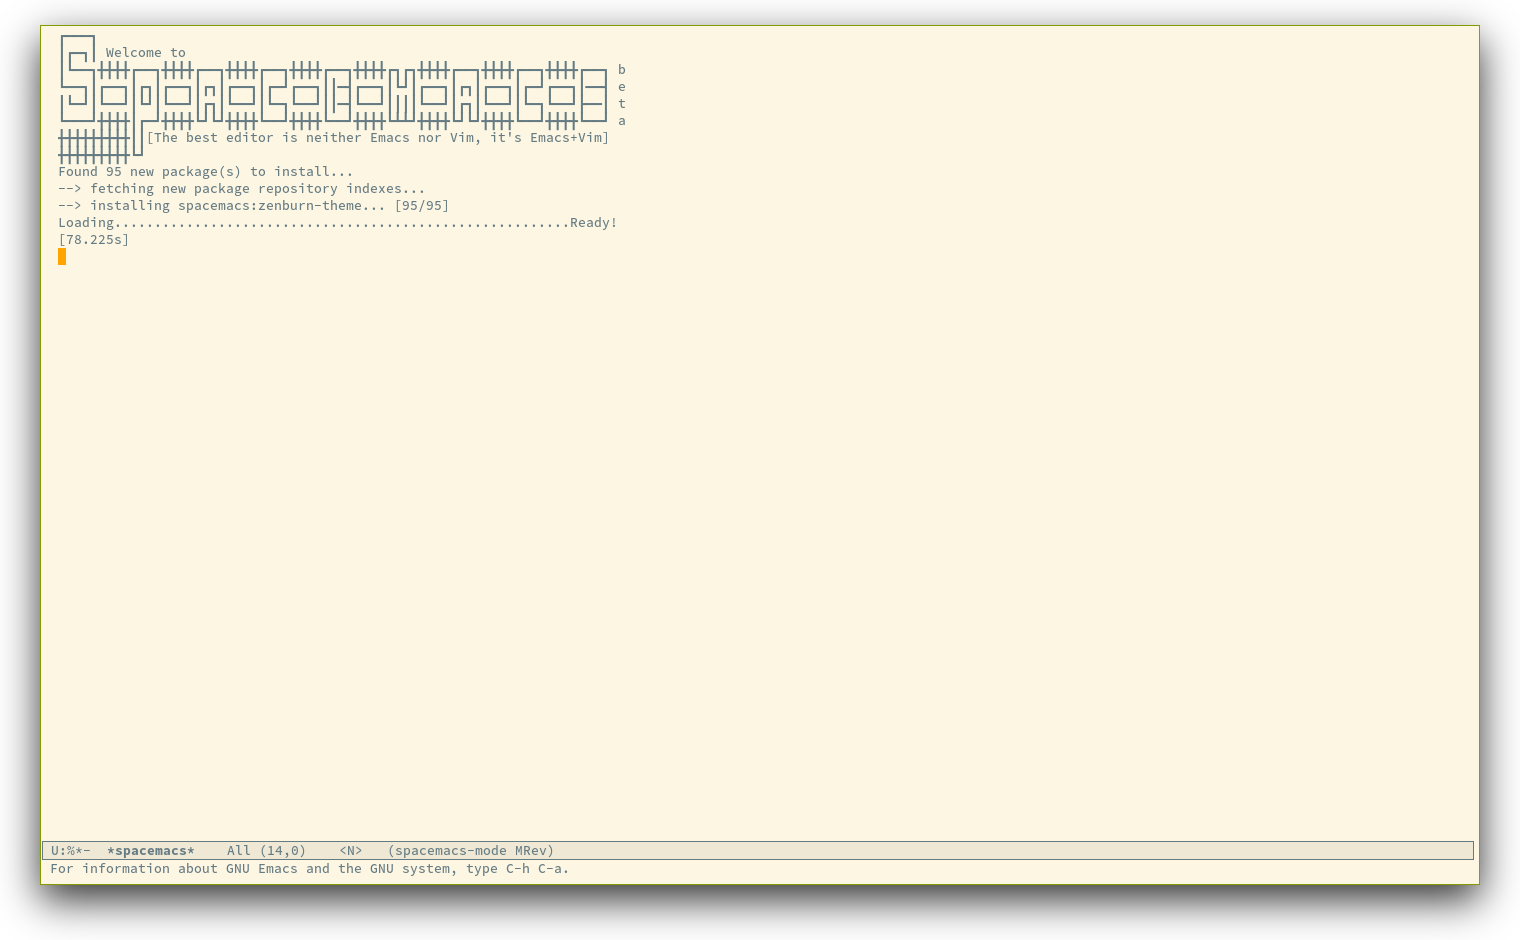 /TakeV/spacemacs/media/commit/a3aaf8a8f92d519f4692d2d9dd16ed480b5ea534/doc/img/spacemacs-startup.png